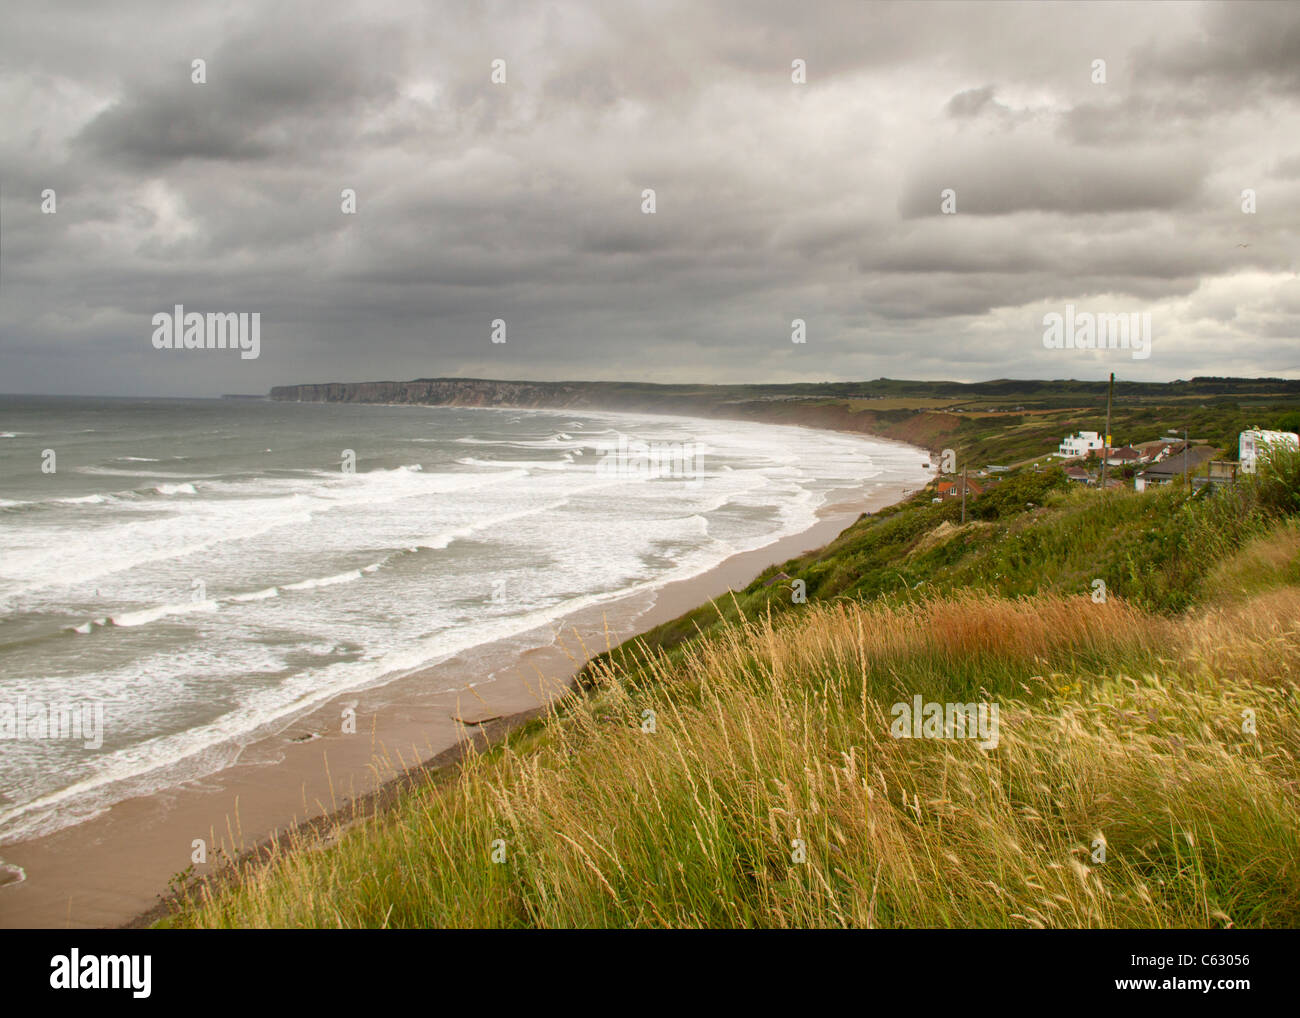 Filey on the Yorkshire coast stormy day Stock Photo